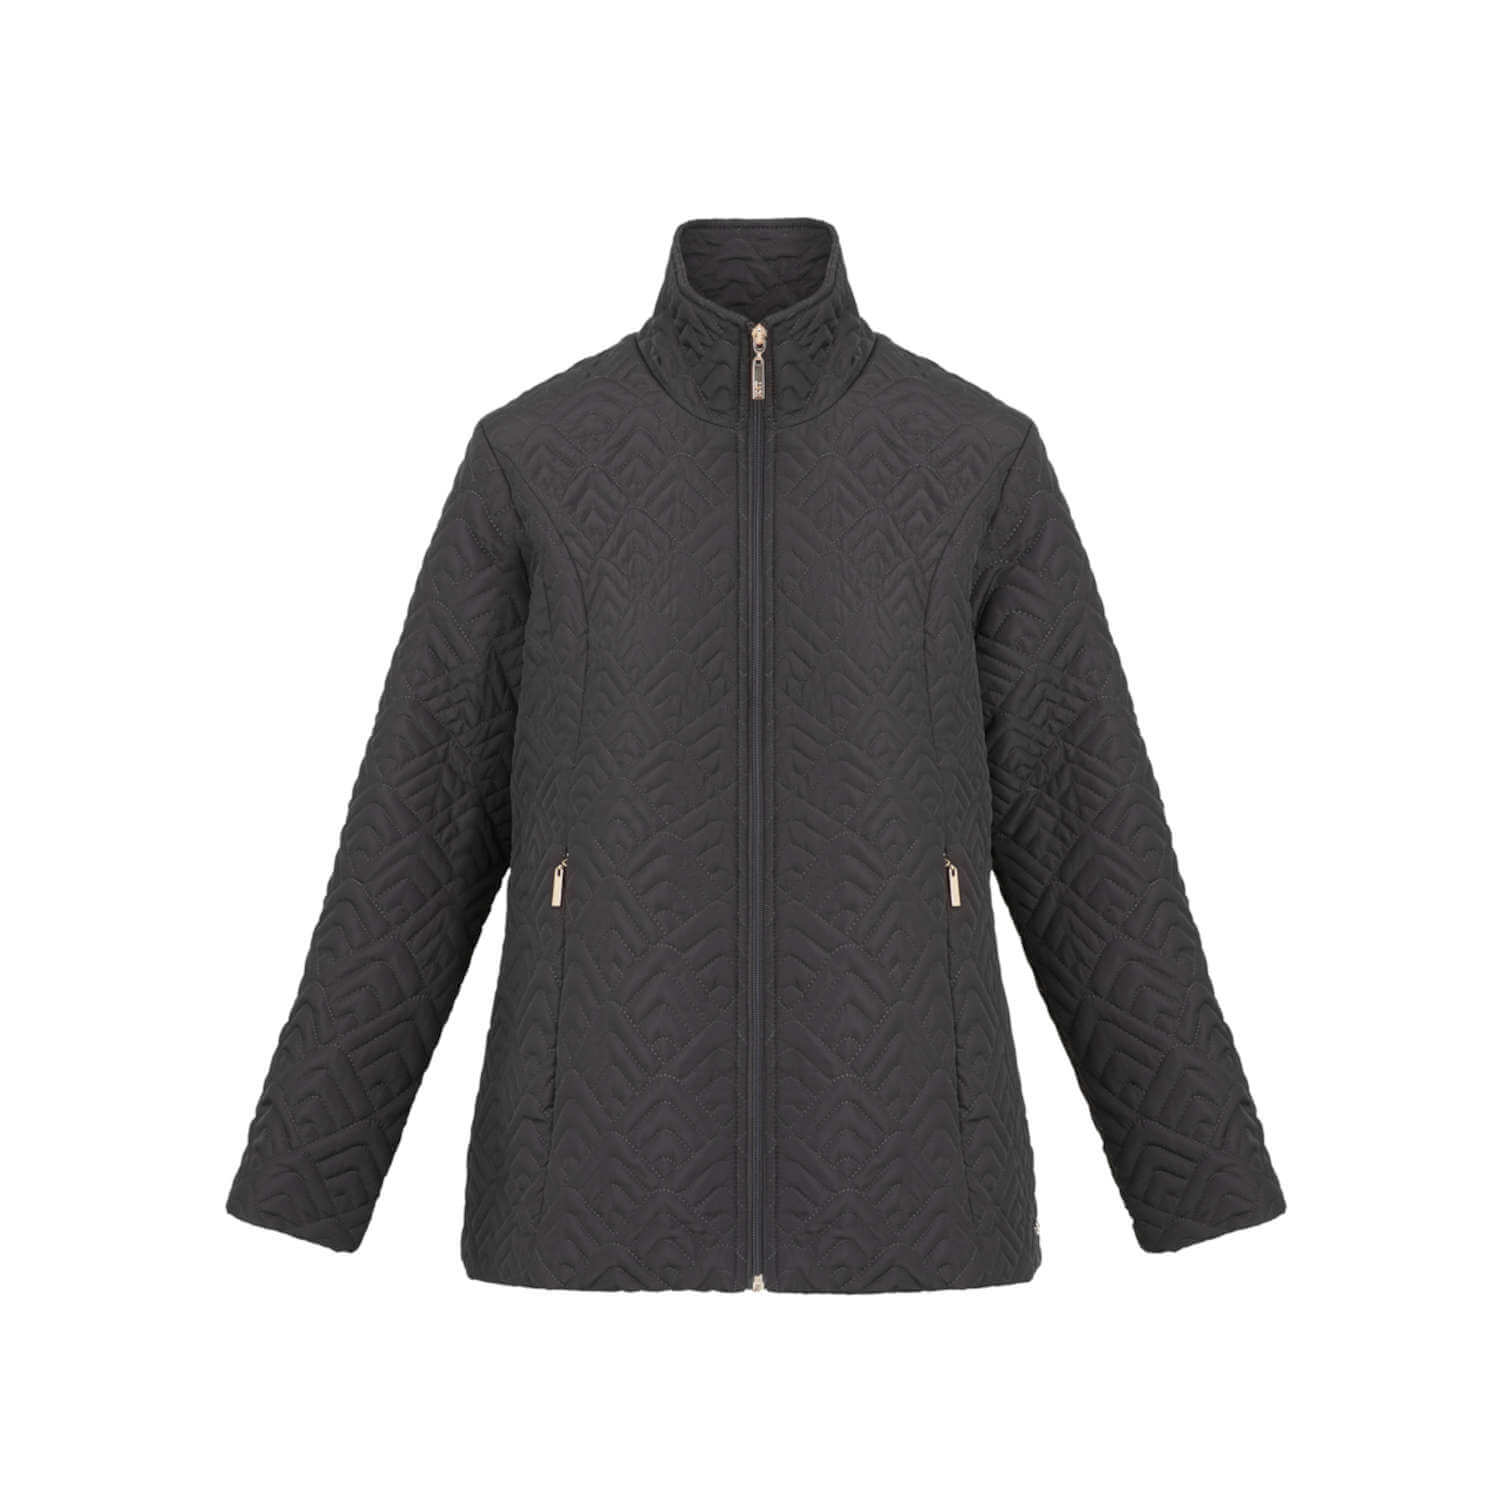 Tigiwear Quilted Coat - Charcoal 6 Shaws Department Stores